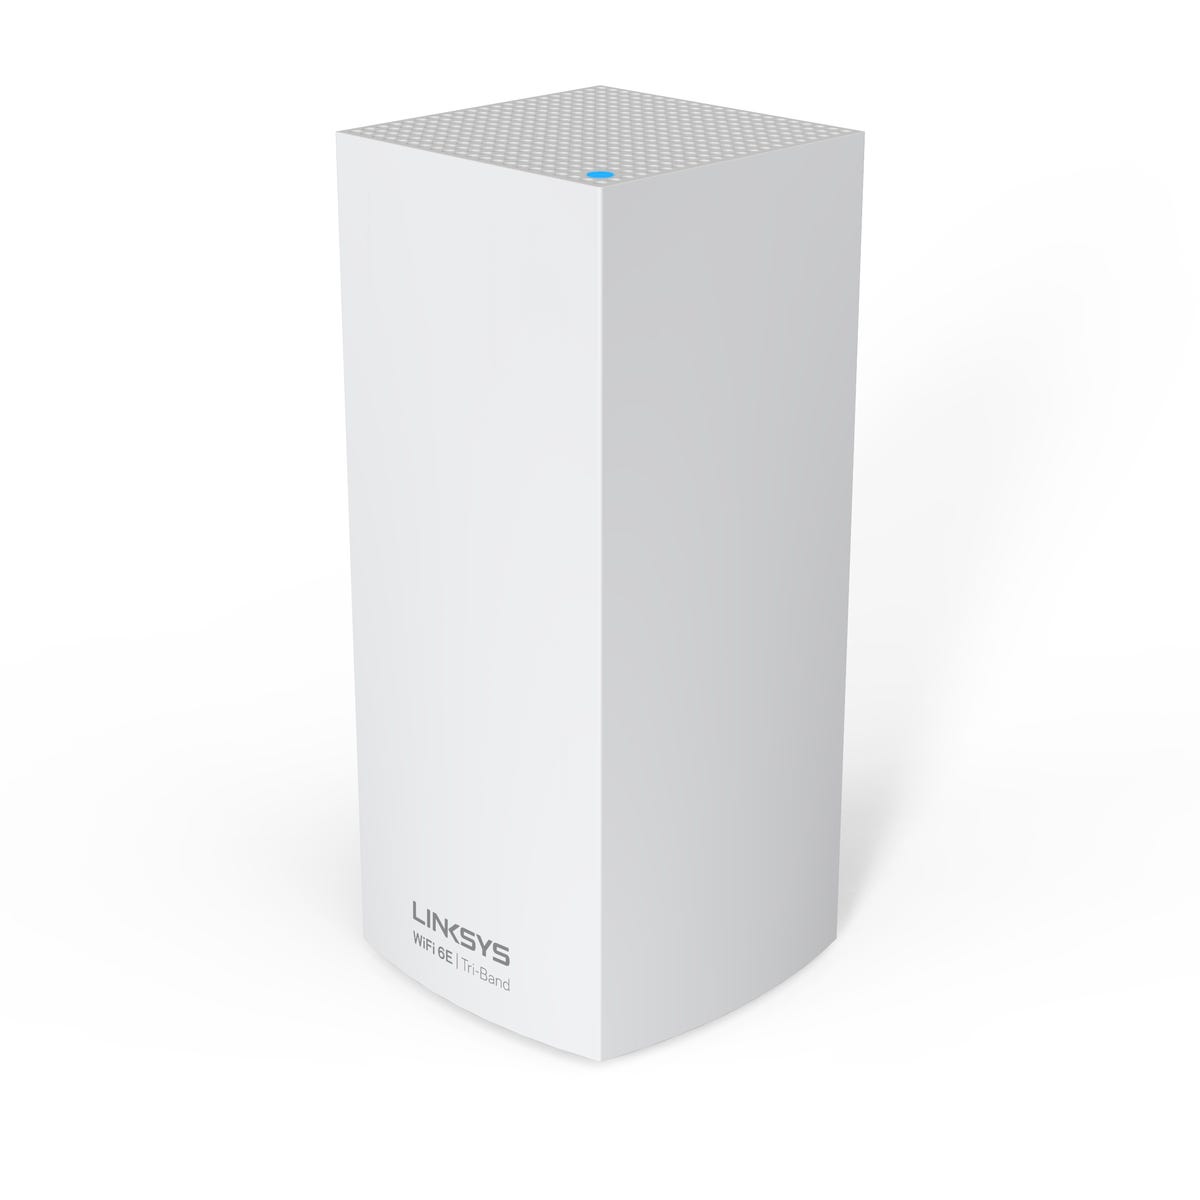 linksys-axe8400-front01.png